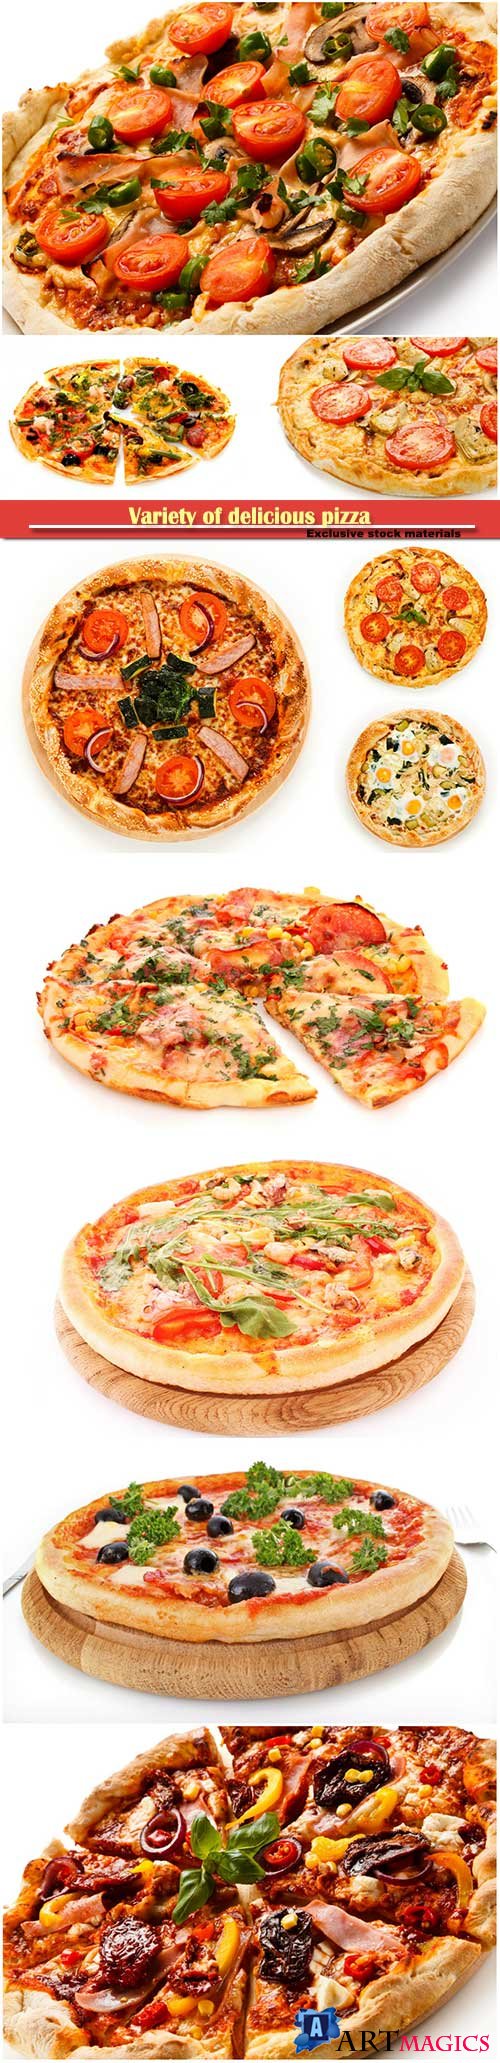 Variety of delicious pizza